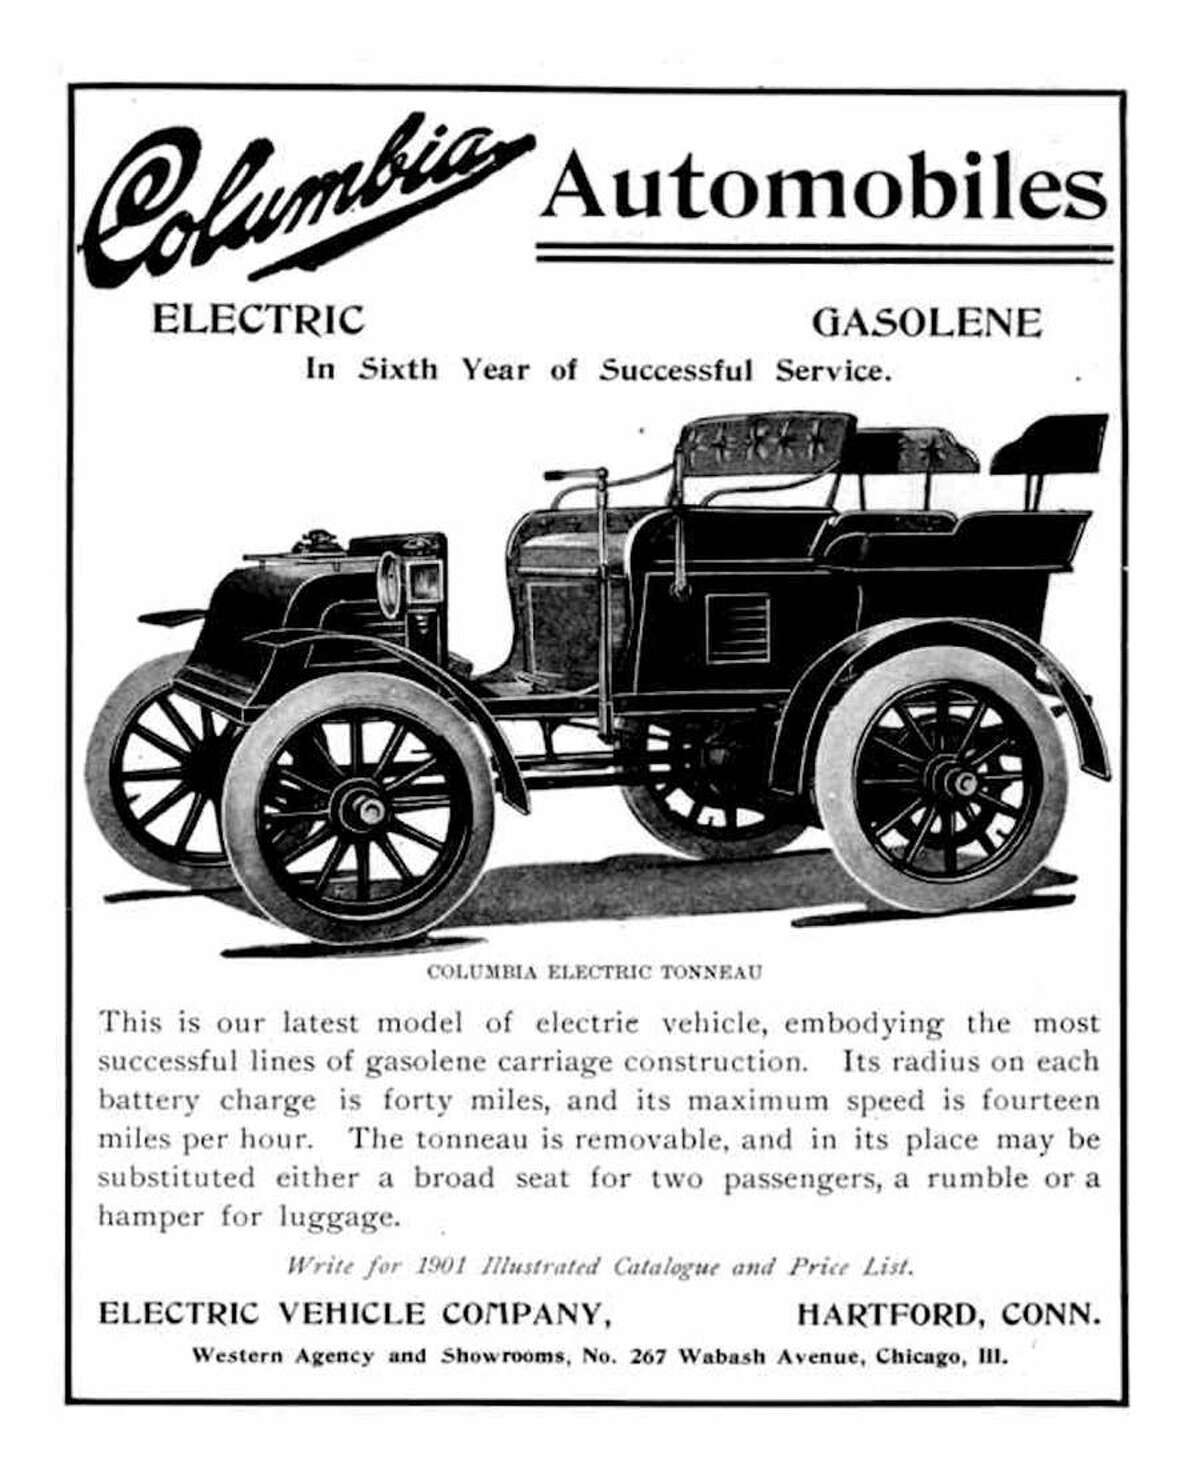 A 1901 advertisement for a Columbia Electric Co. vehicle.